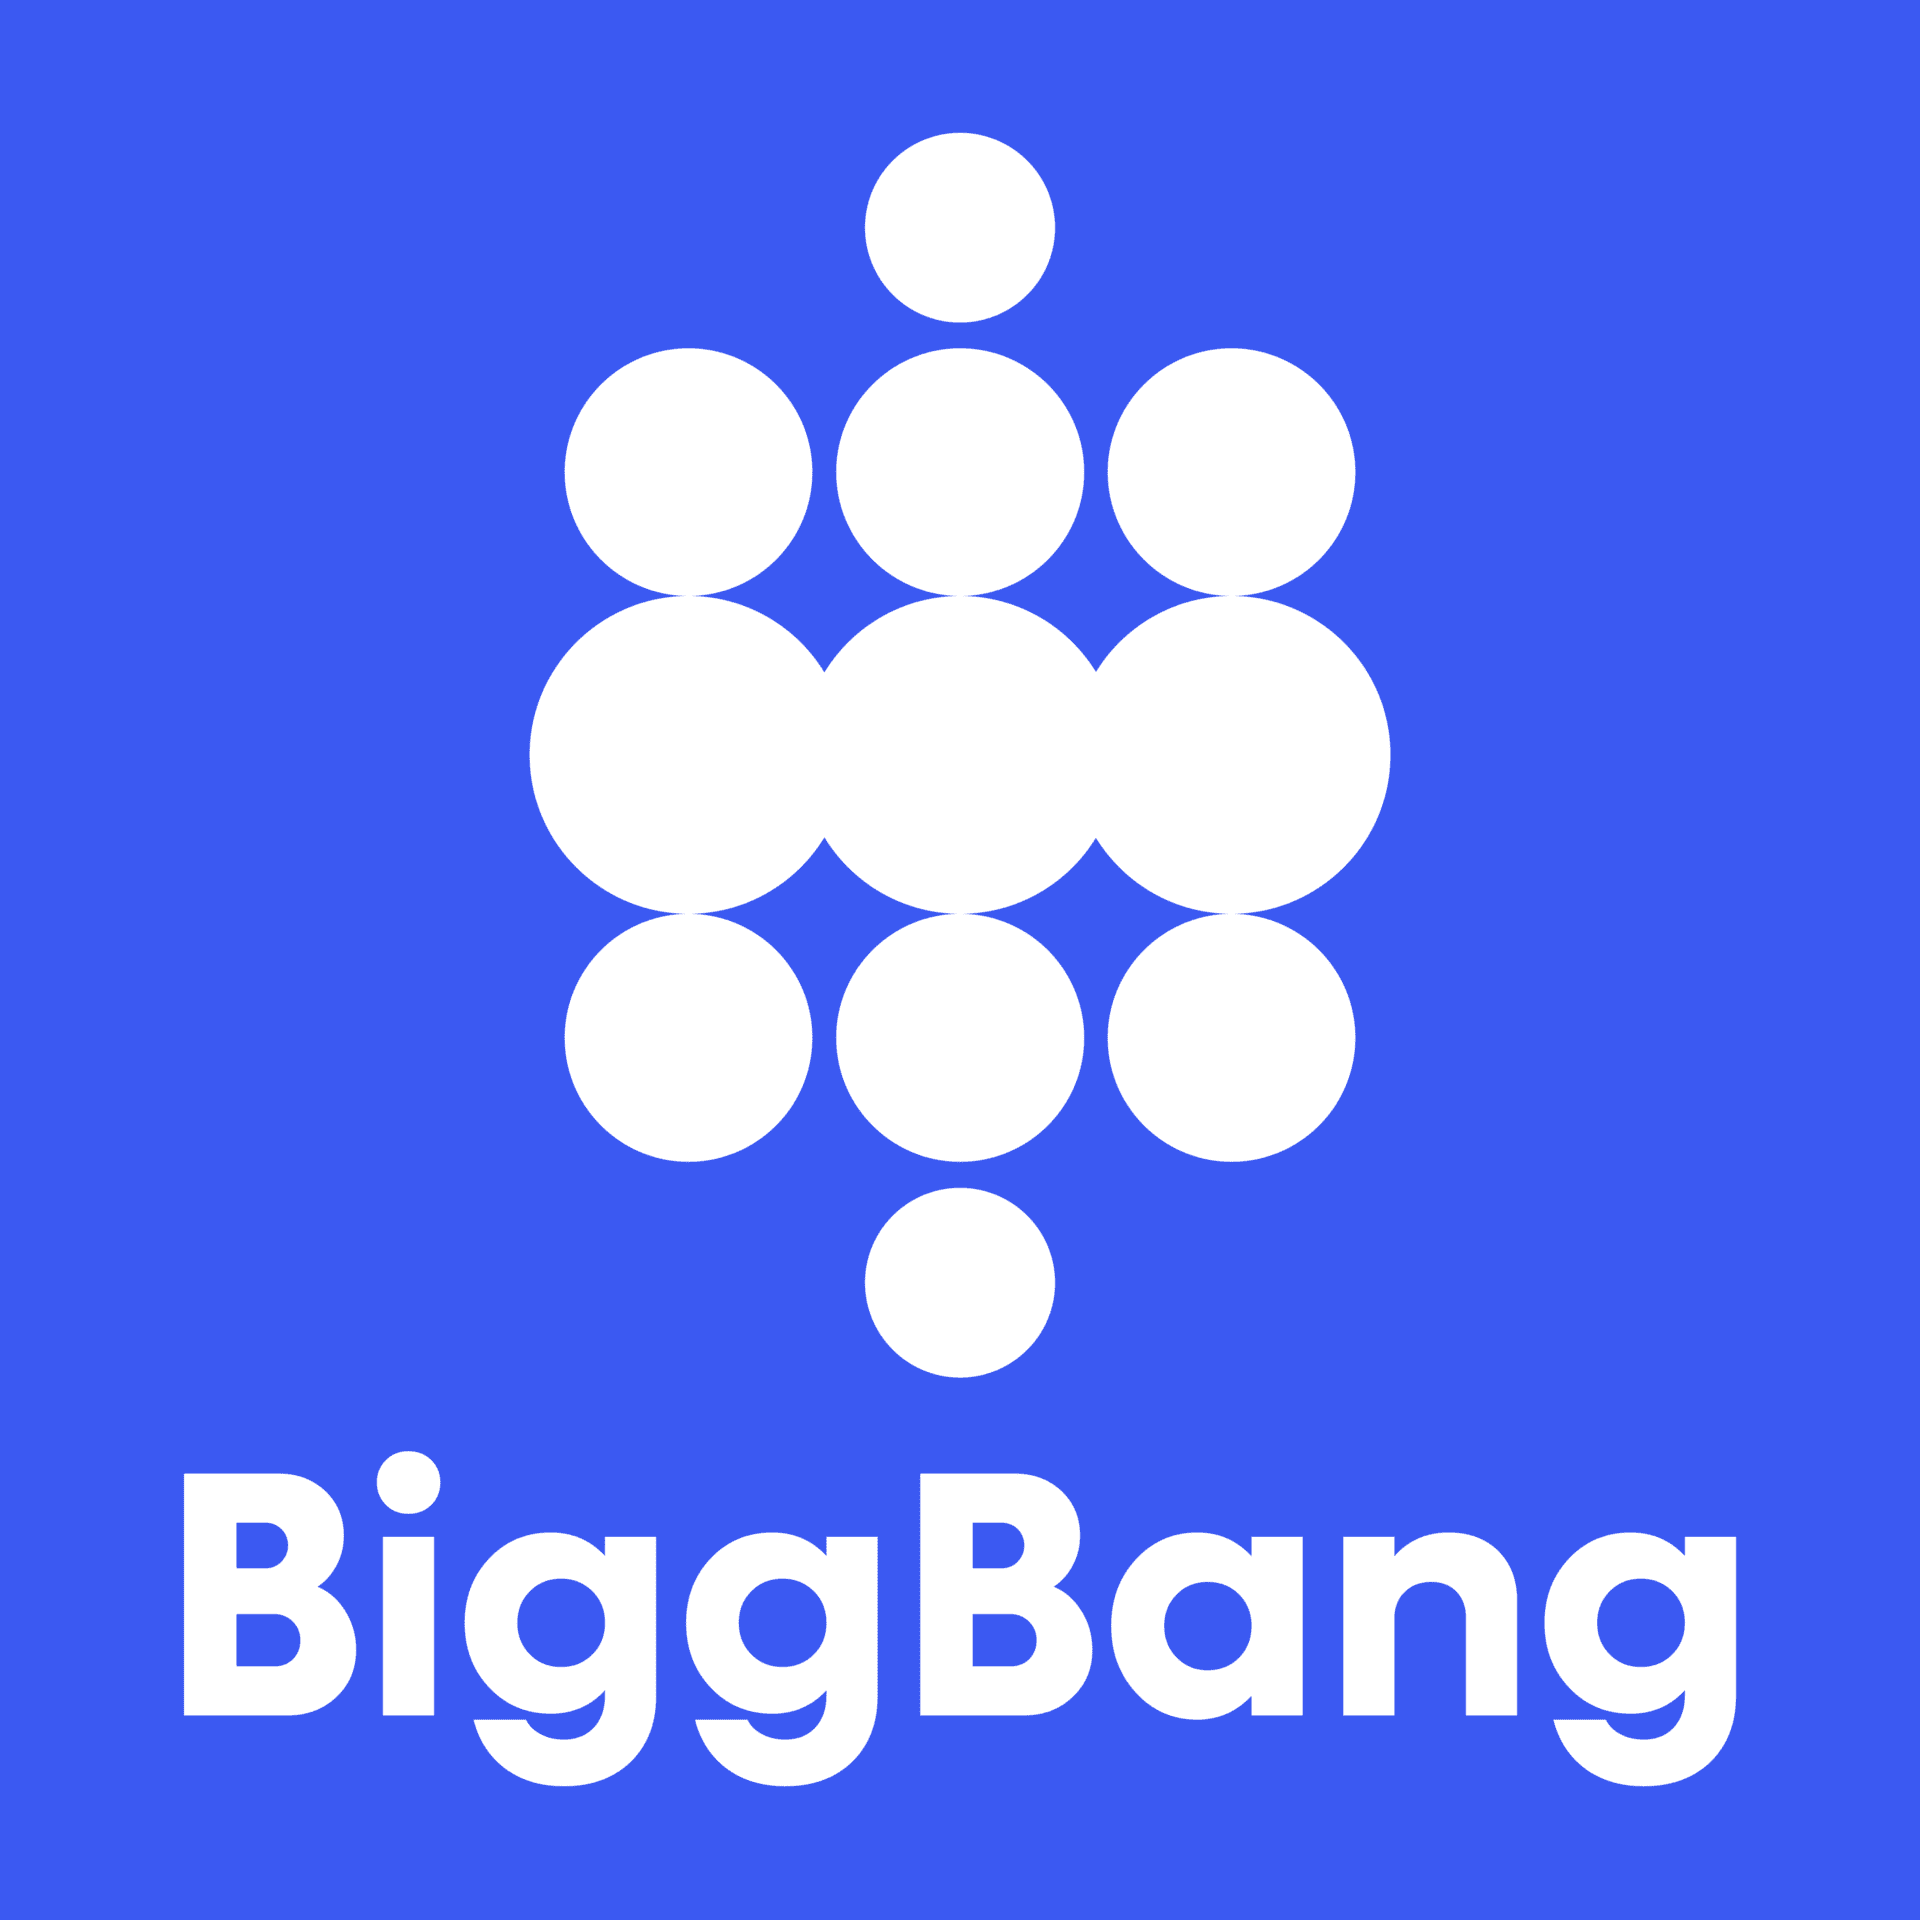 Biggbang Coworking: The Futuristic Workspace for Startups and SMEs in Chandigarh & Mohali